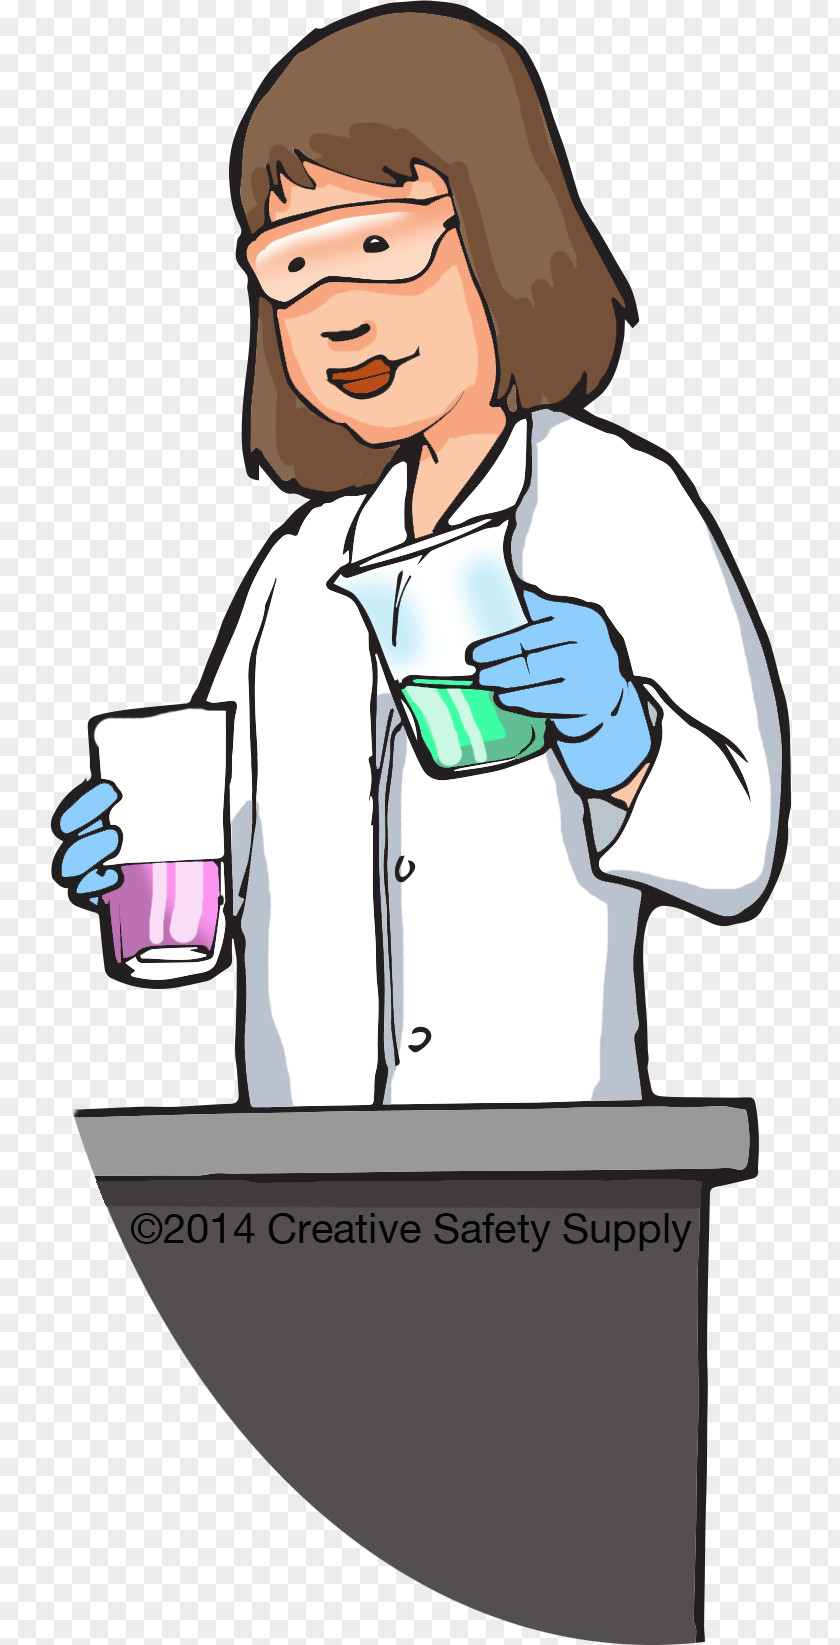 LAB Laboratory Safety Chemistry Chemical Substance Clip Art PNG